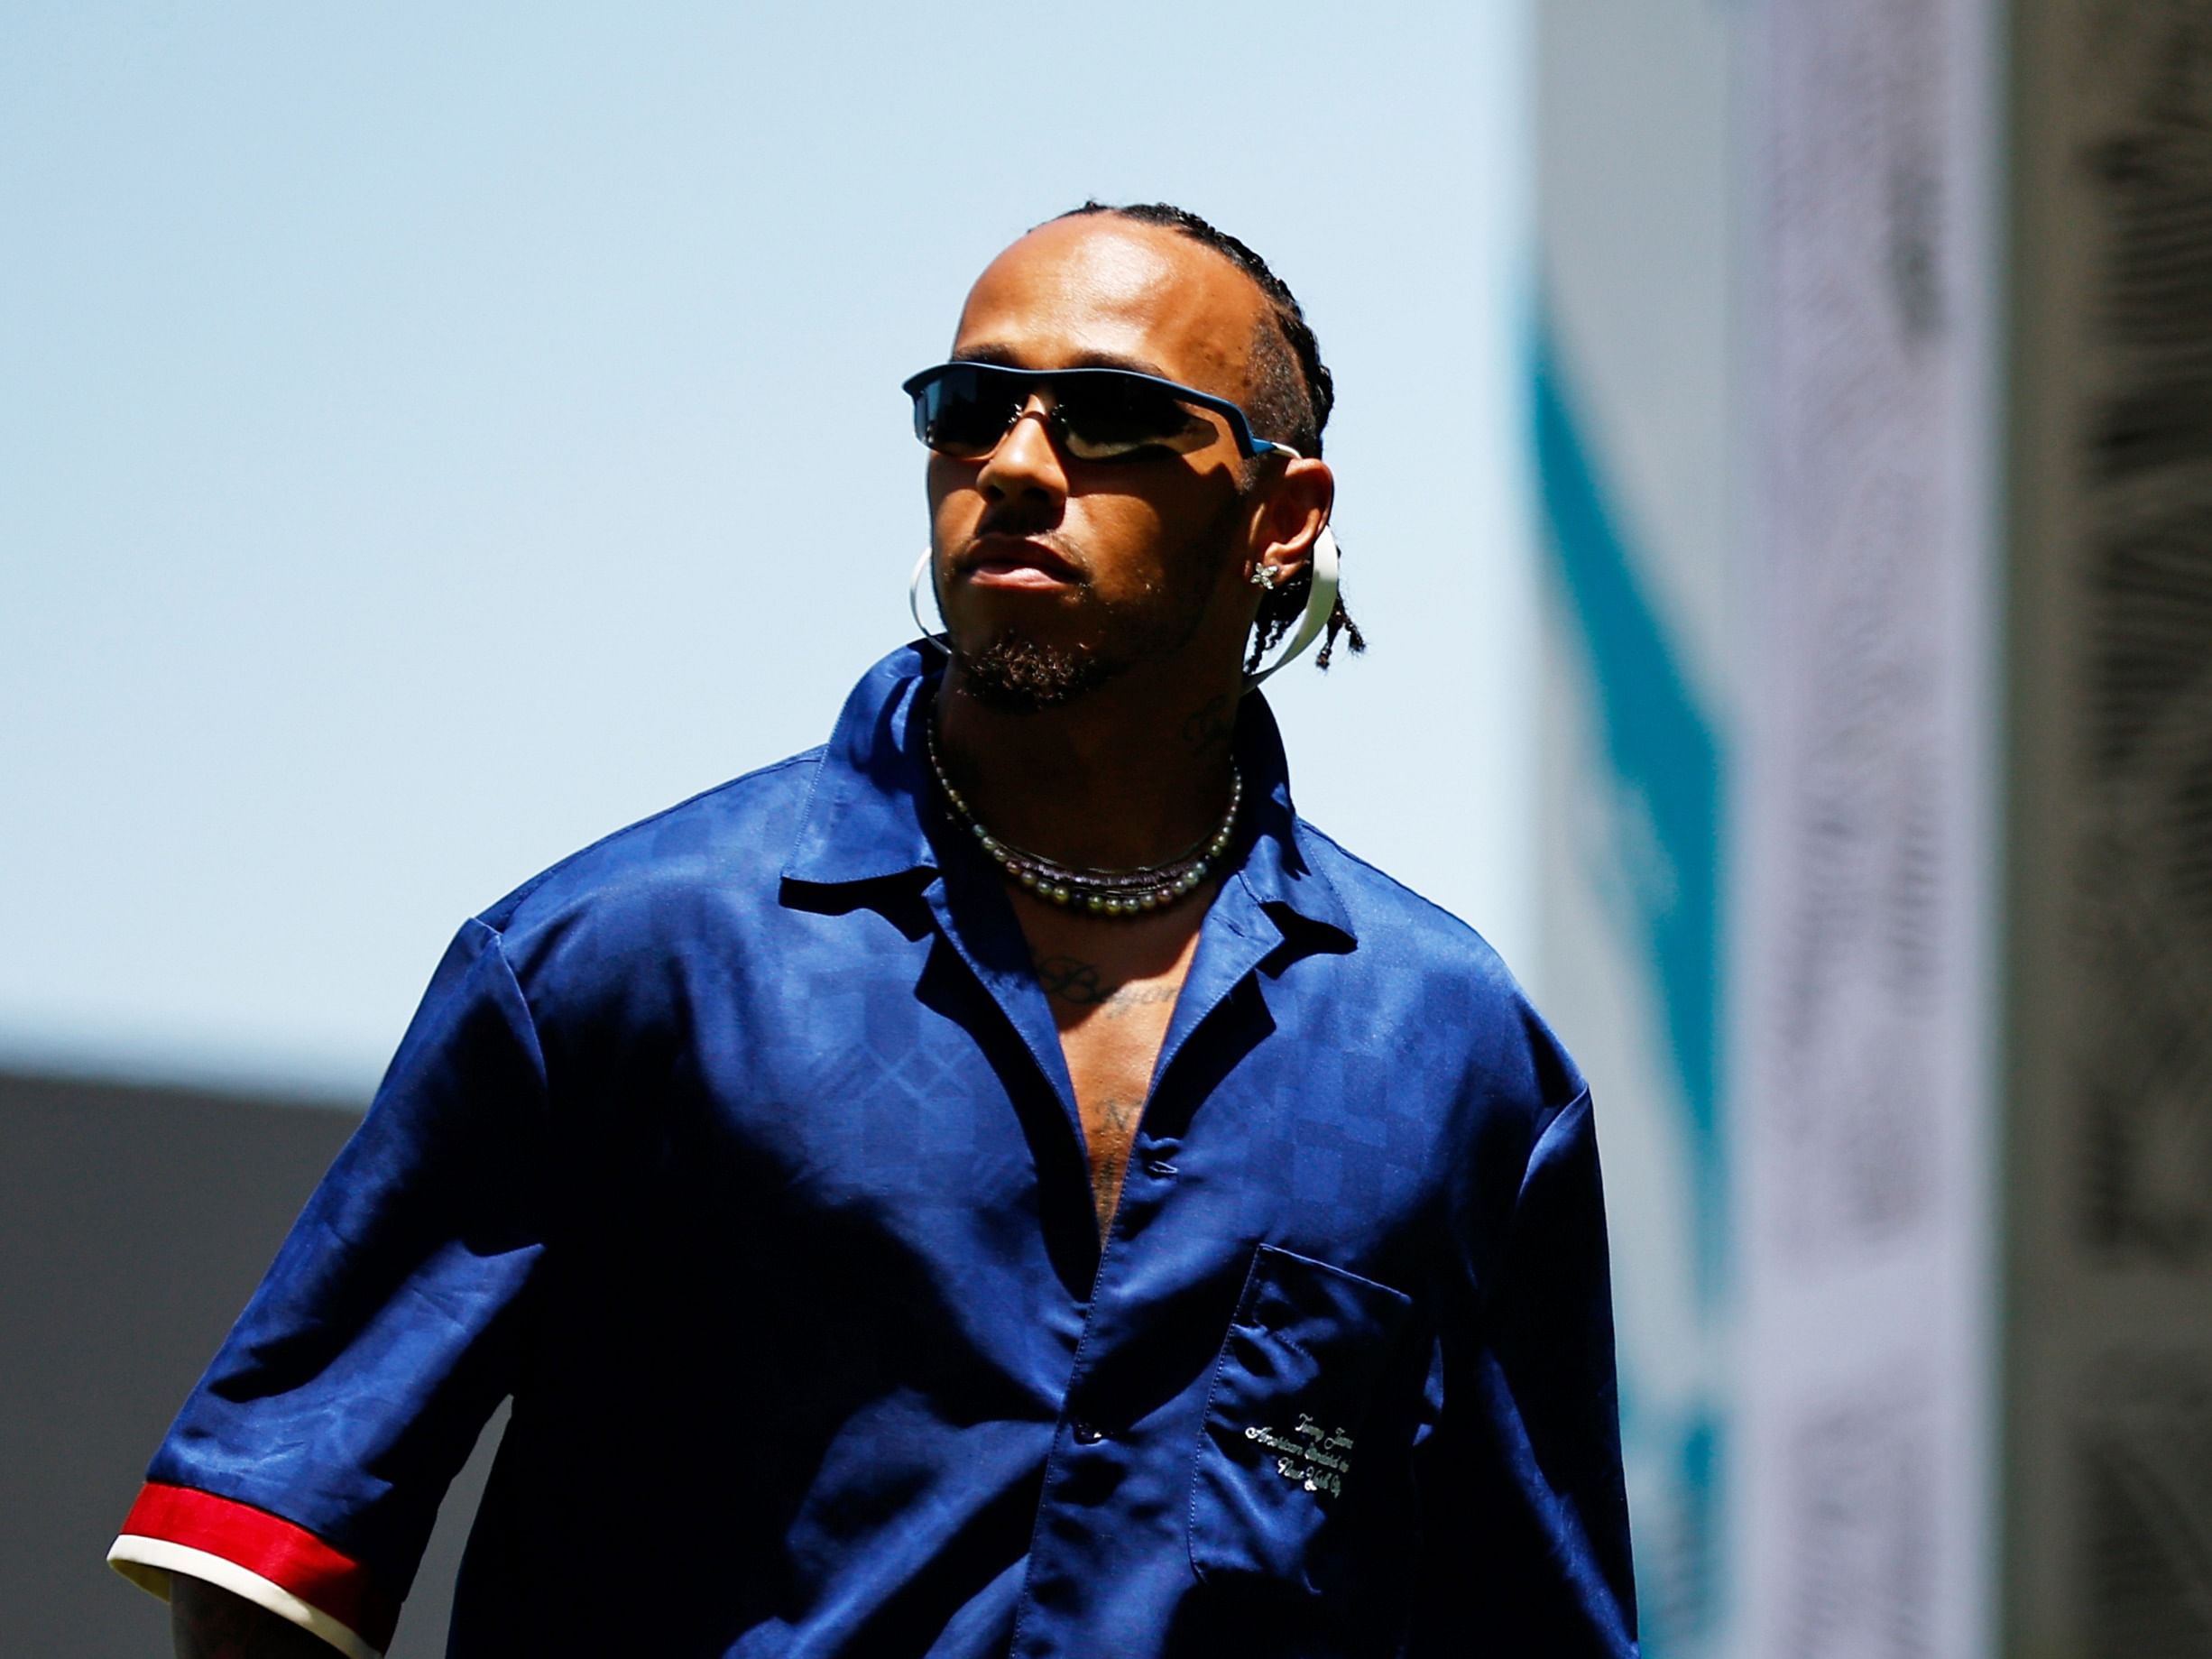 Lewis Hamilton walks in the paddock during previews ahead of the 2023 F1 Miami Grand Prix. (Photo by Jared C. Tilton/Getty Images)